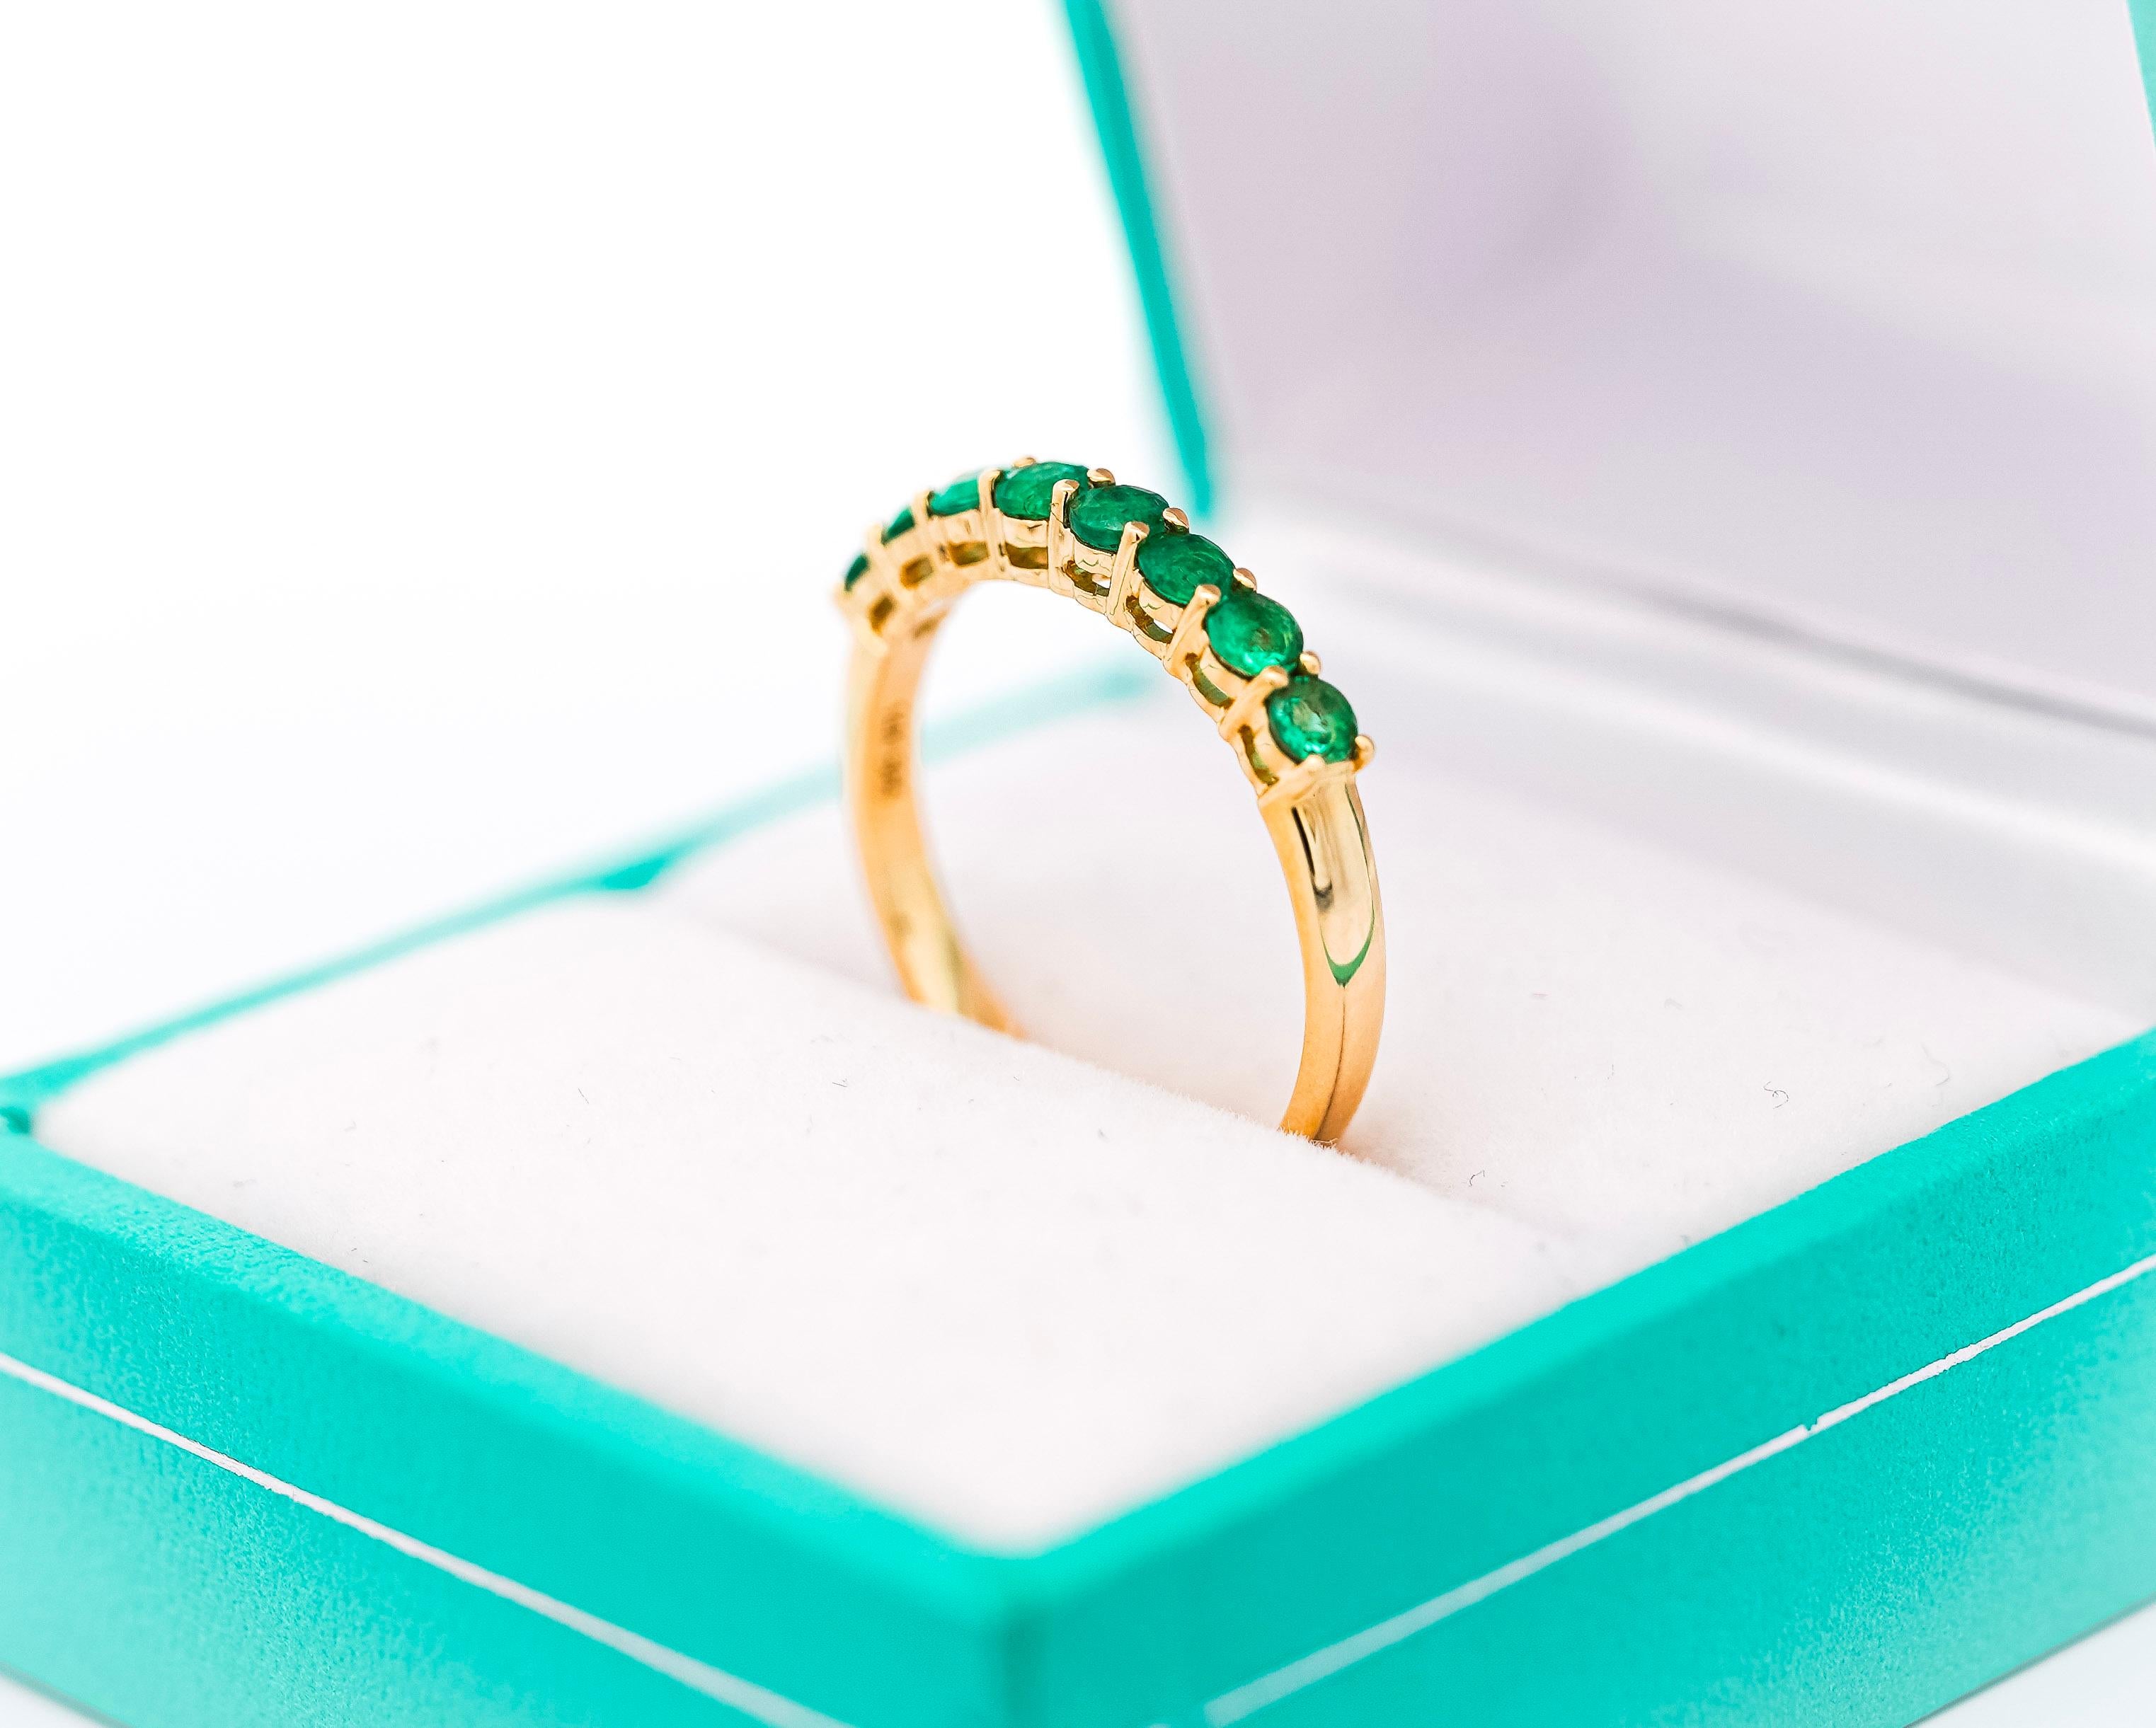 Natural Green Emerald Wedding Band Ring, Set in 14K Solid Yellow Gold. Featuring a 2.2mm band and substantially large round-cut emeralds. The perfect emerald band that's big enough to be noticed on your finger, but not too bulky. The emeralds are